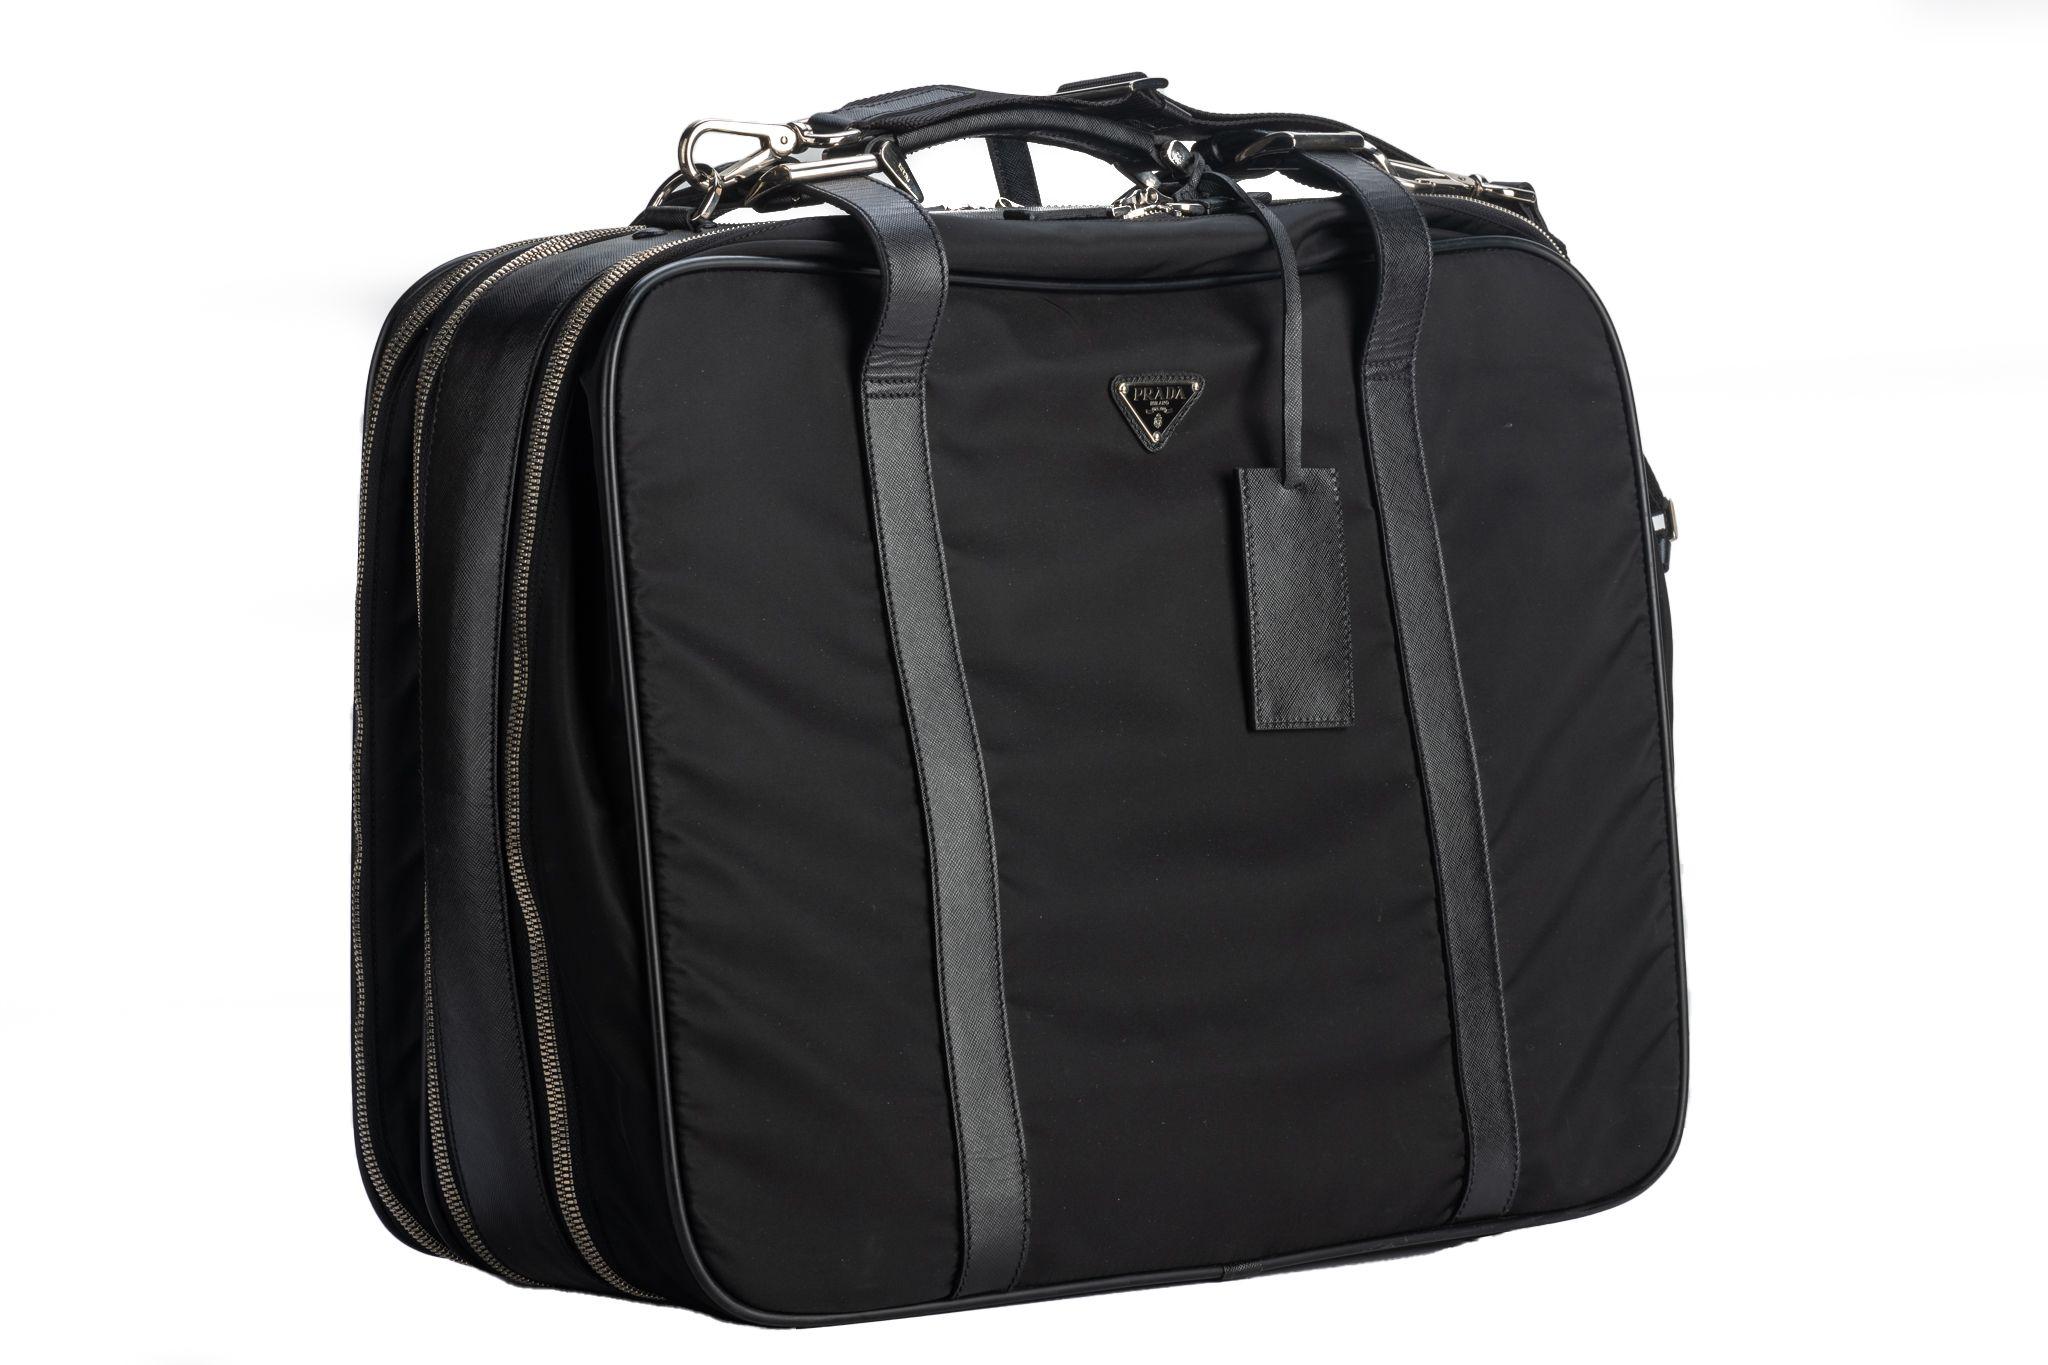 Prada excellent condition black nylon and leather weekender suitcase. Detachable strap. Multiple Compartments.